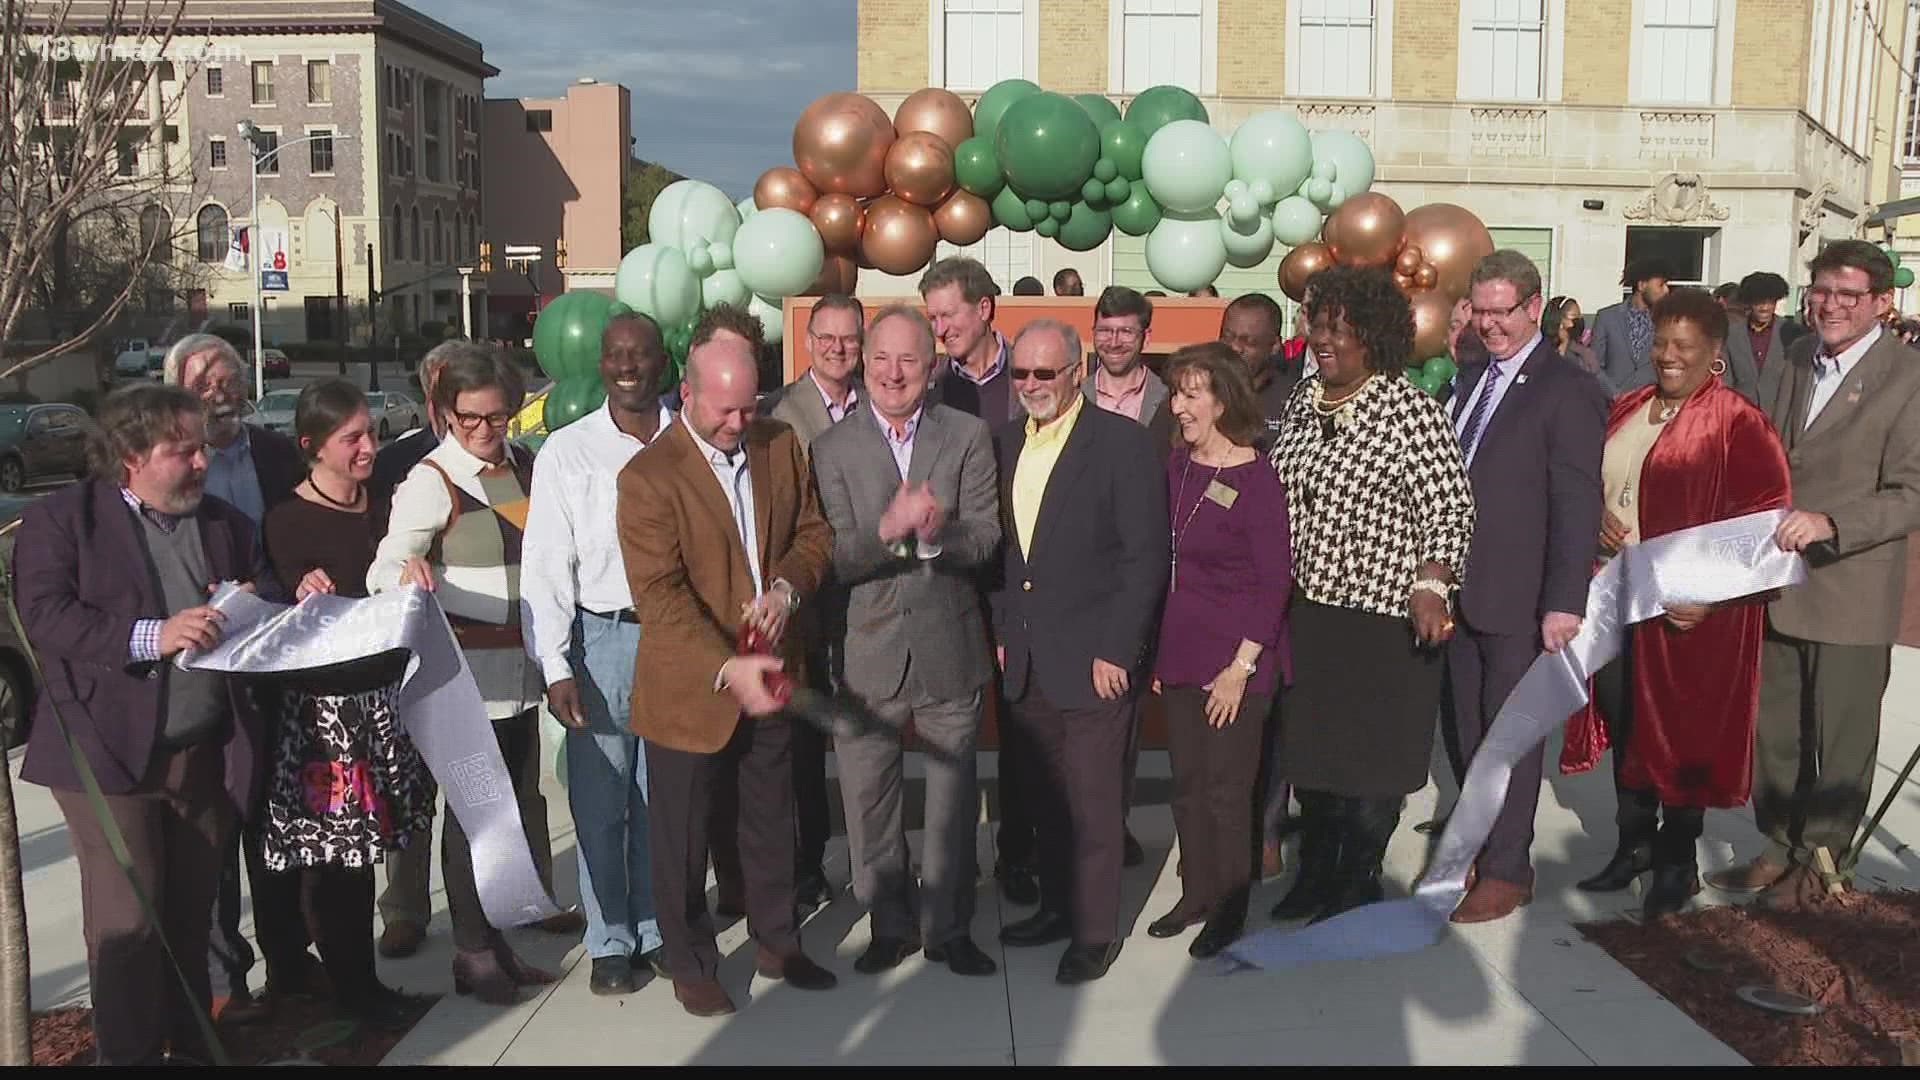 Downtown Macon is now home to a new boutique hotel. This ribbon cutting brought in more than 100 people to get a sneak peek of this new attraction.